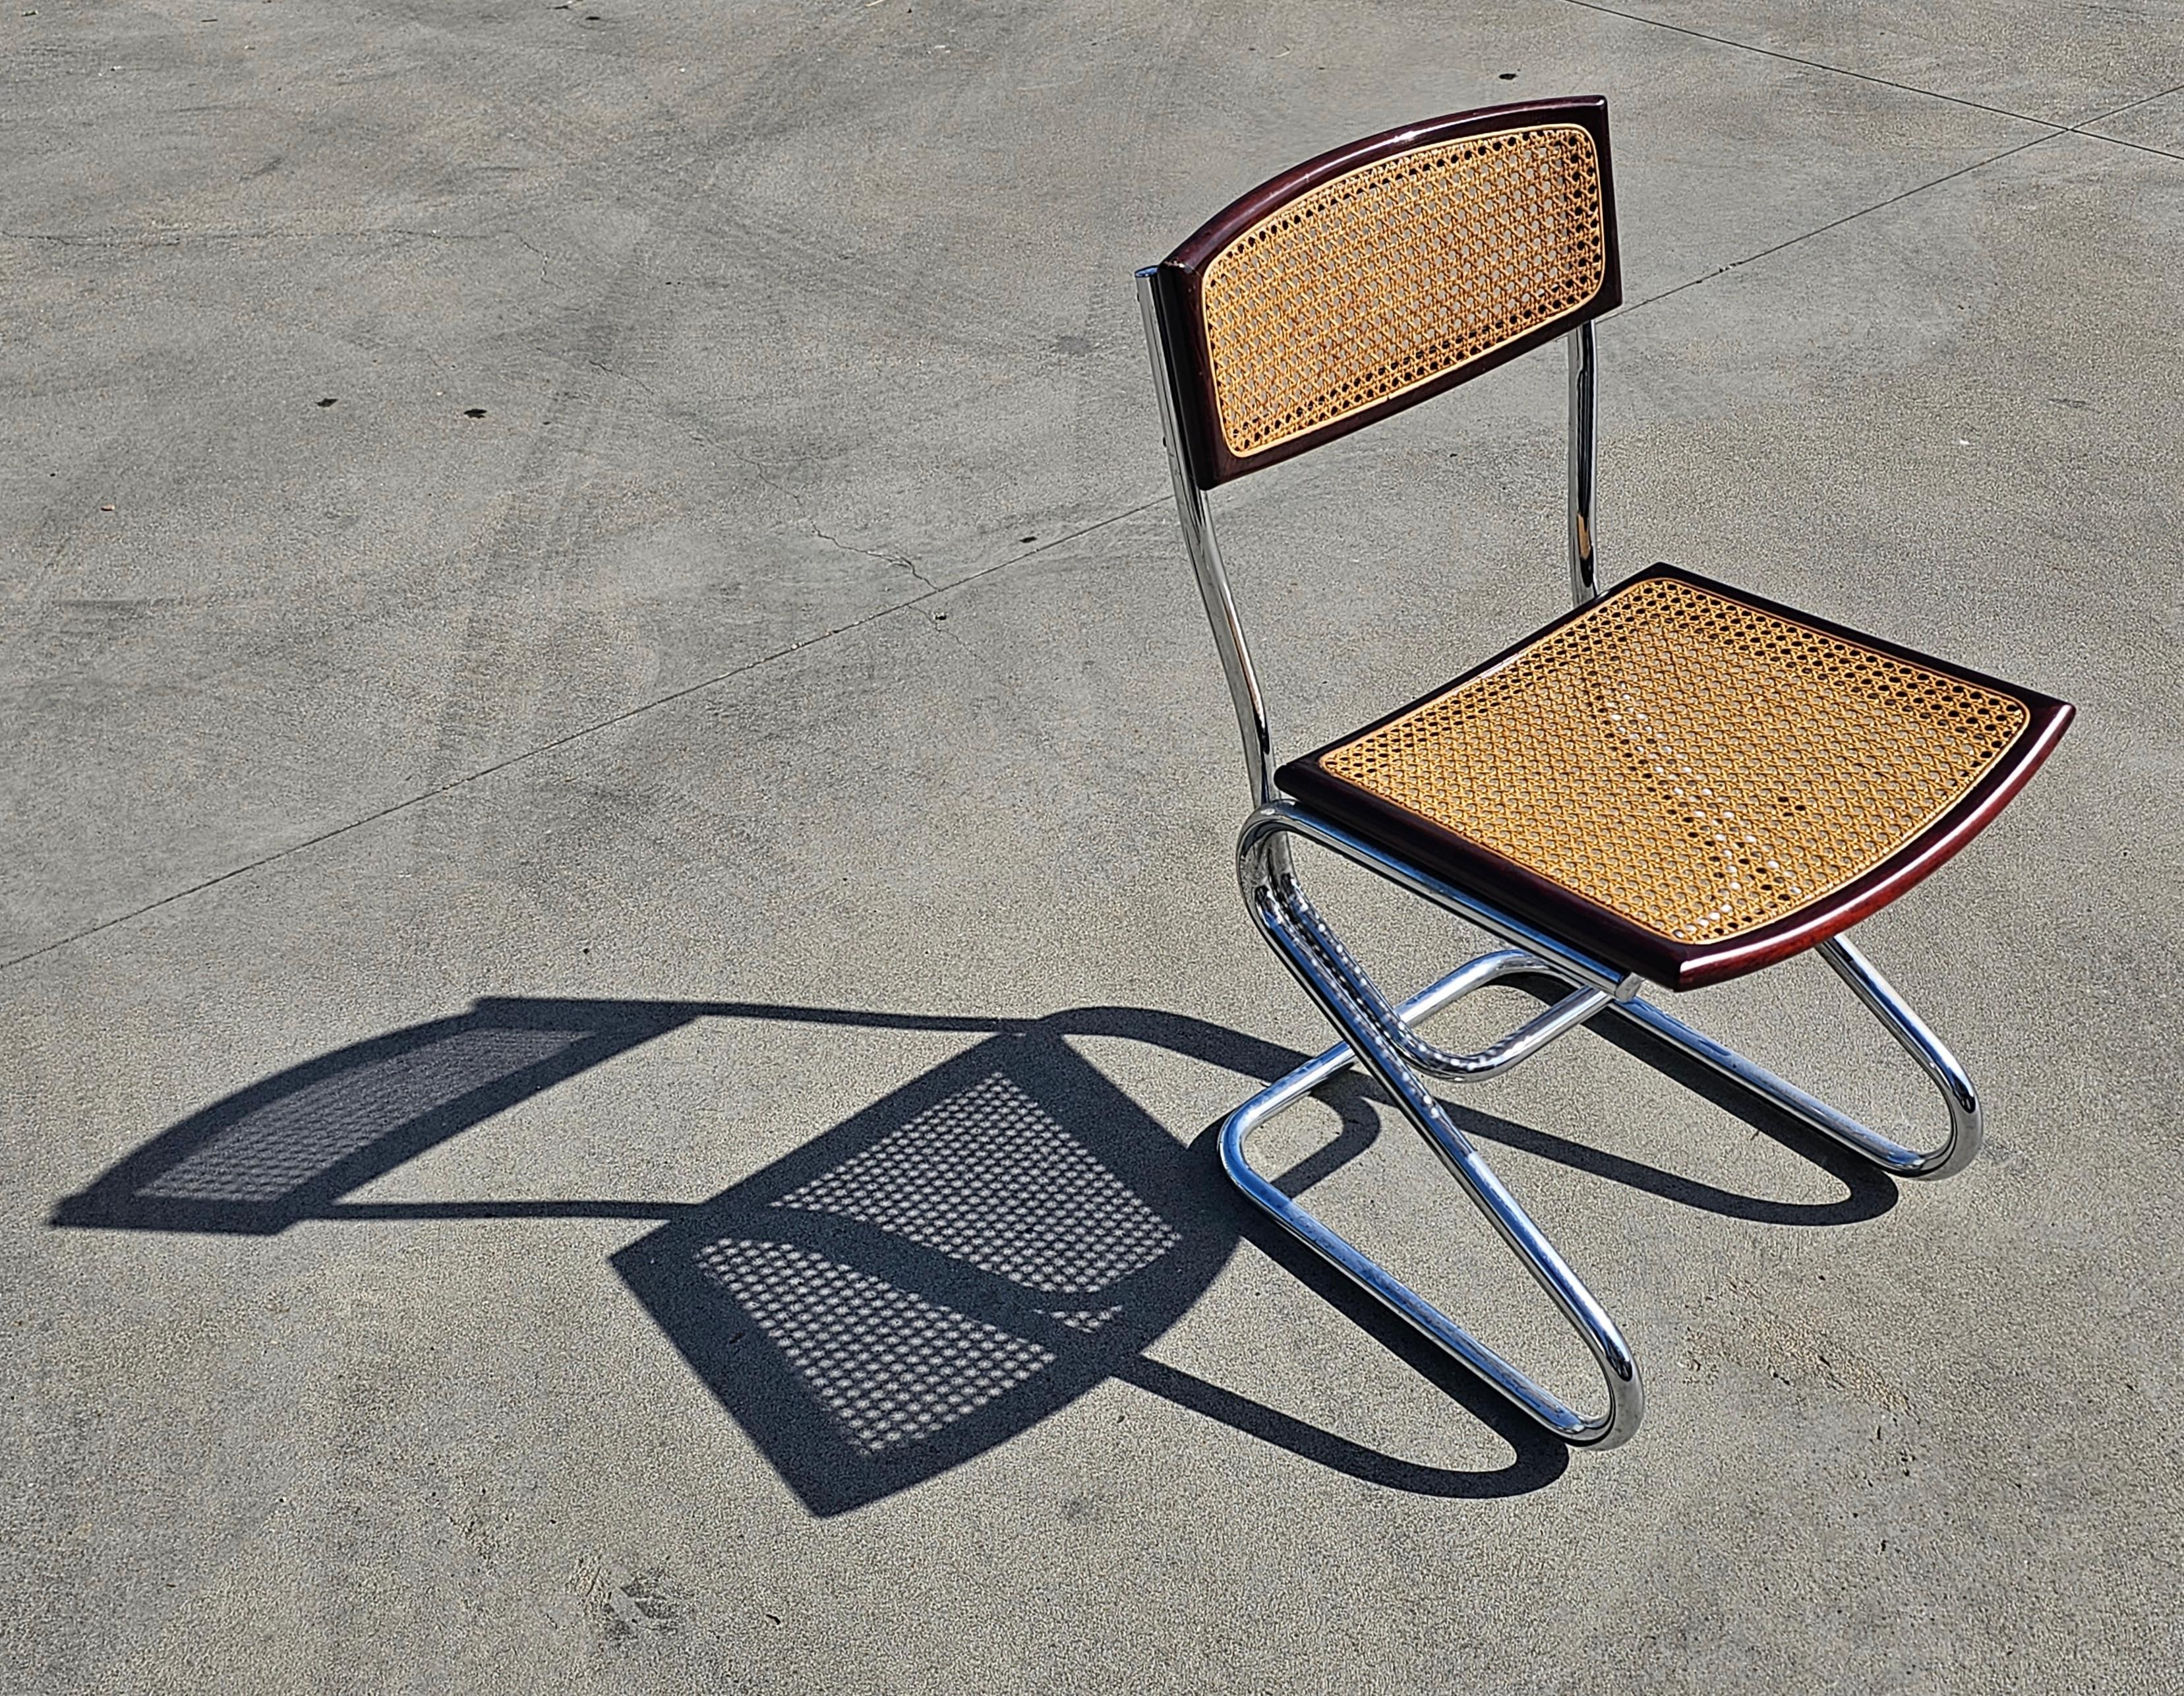 In this listing you will find Bauhaus style dining chairs done in style of Cesca chairs designed by Marcel Breuer. They feature tubular frames with seats and backrests done in beech wood and cane. The cane on the seats was recently replaced. Very